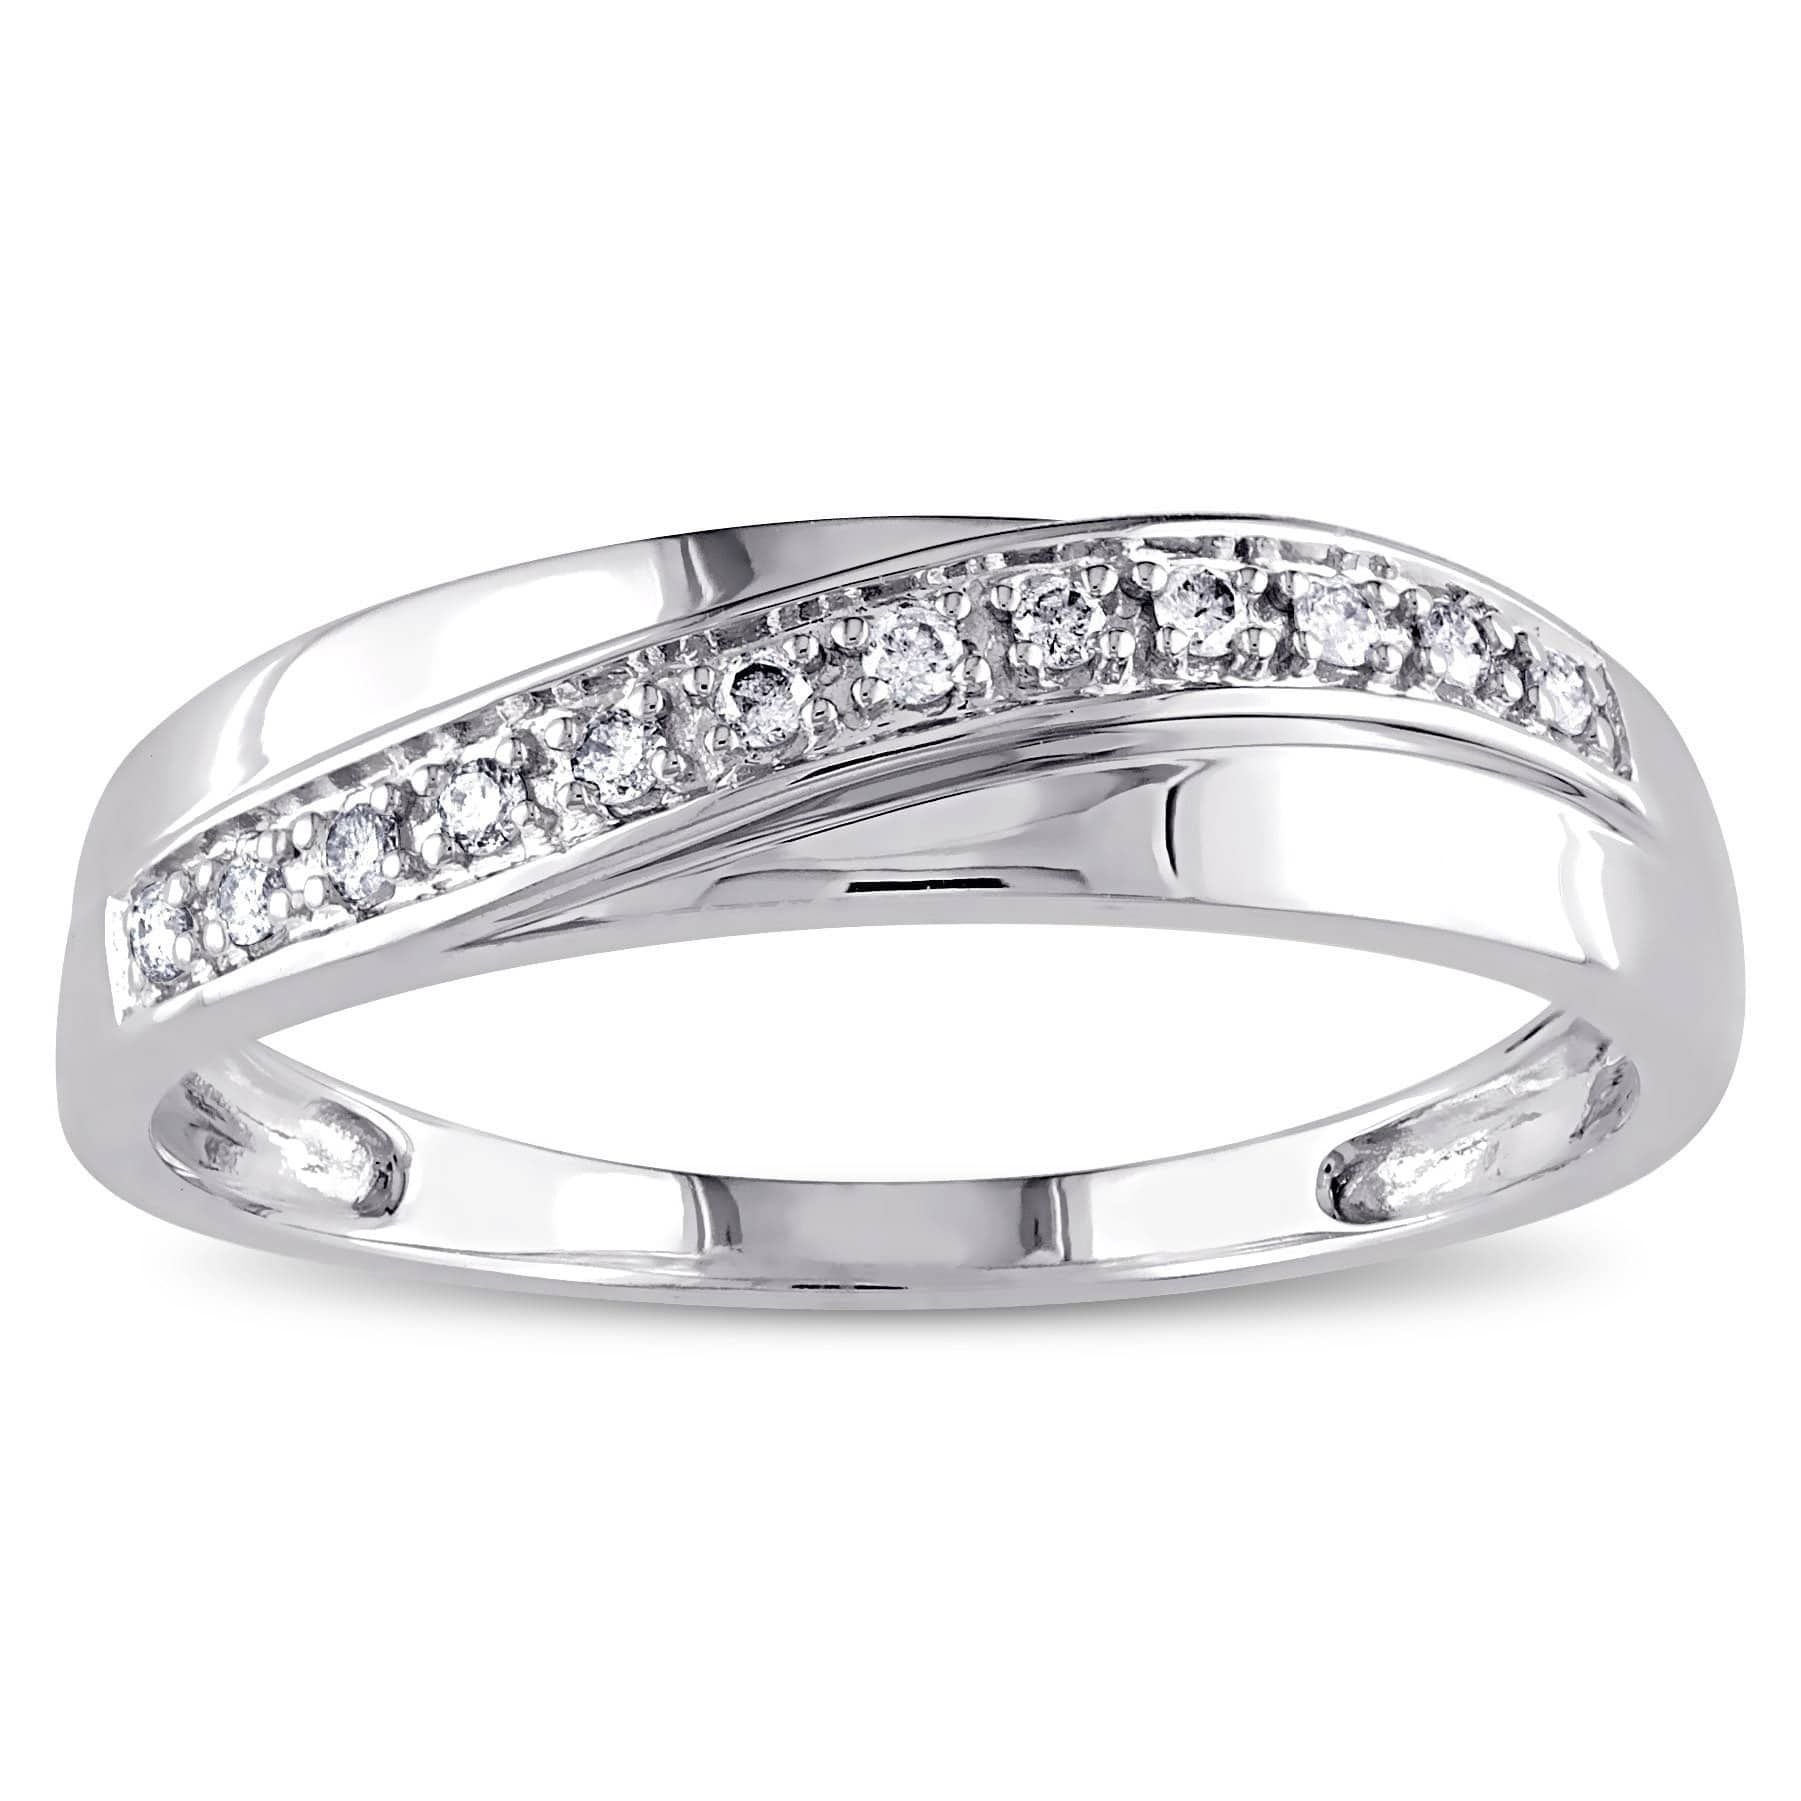 Shop Miadora Men's 10k White Gold 1/10ct Tdw Diamond Wedding Band Pertaining To Recent Diamond Wave Vintage Style Anniversary Bands In 10k White Gold (View 4 of 15)